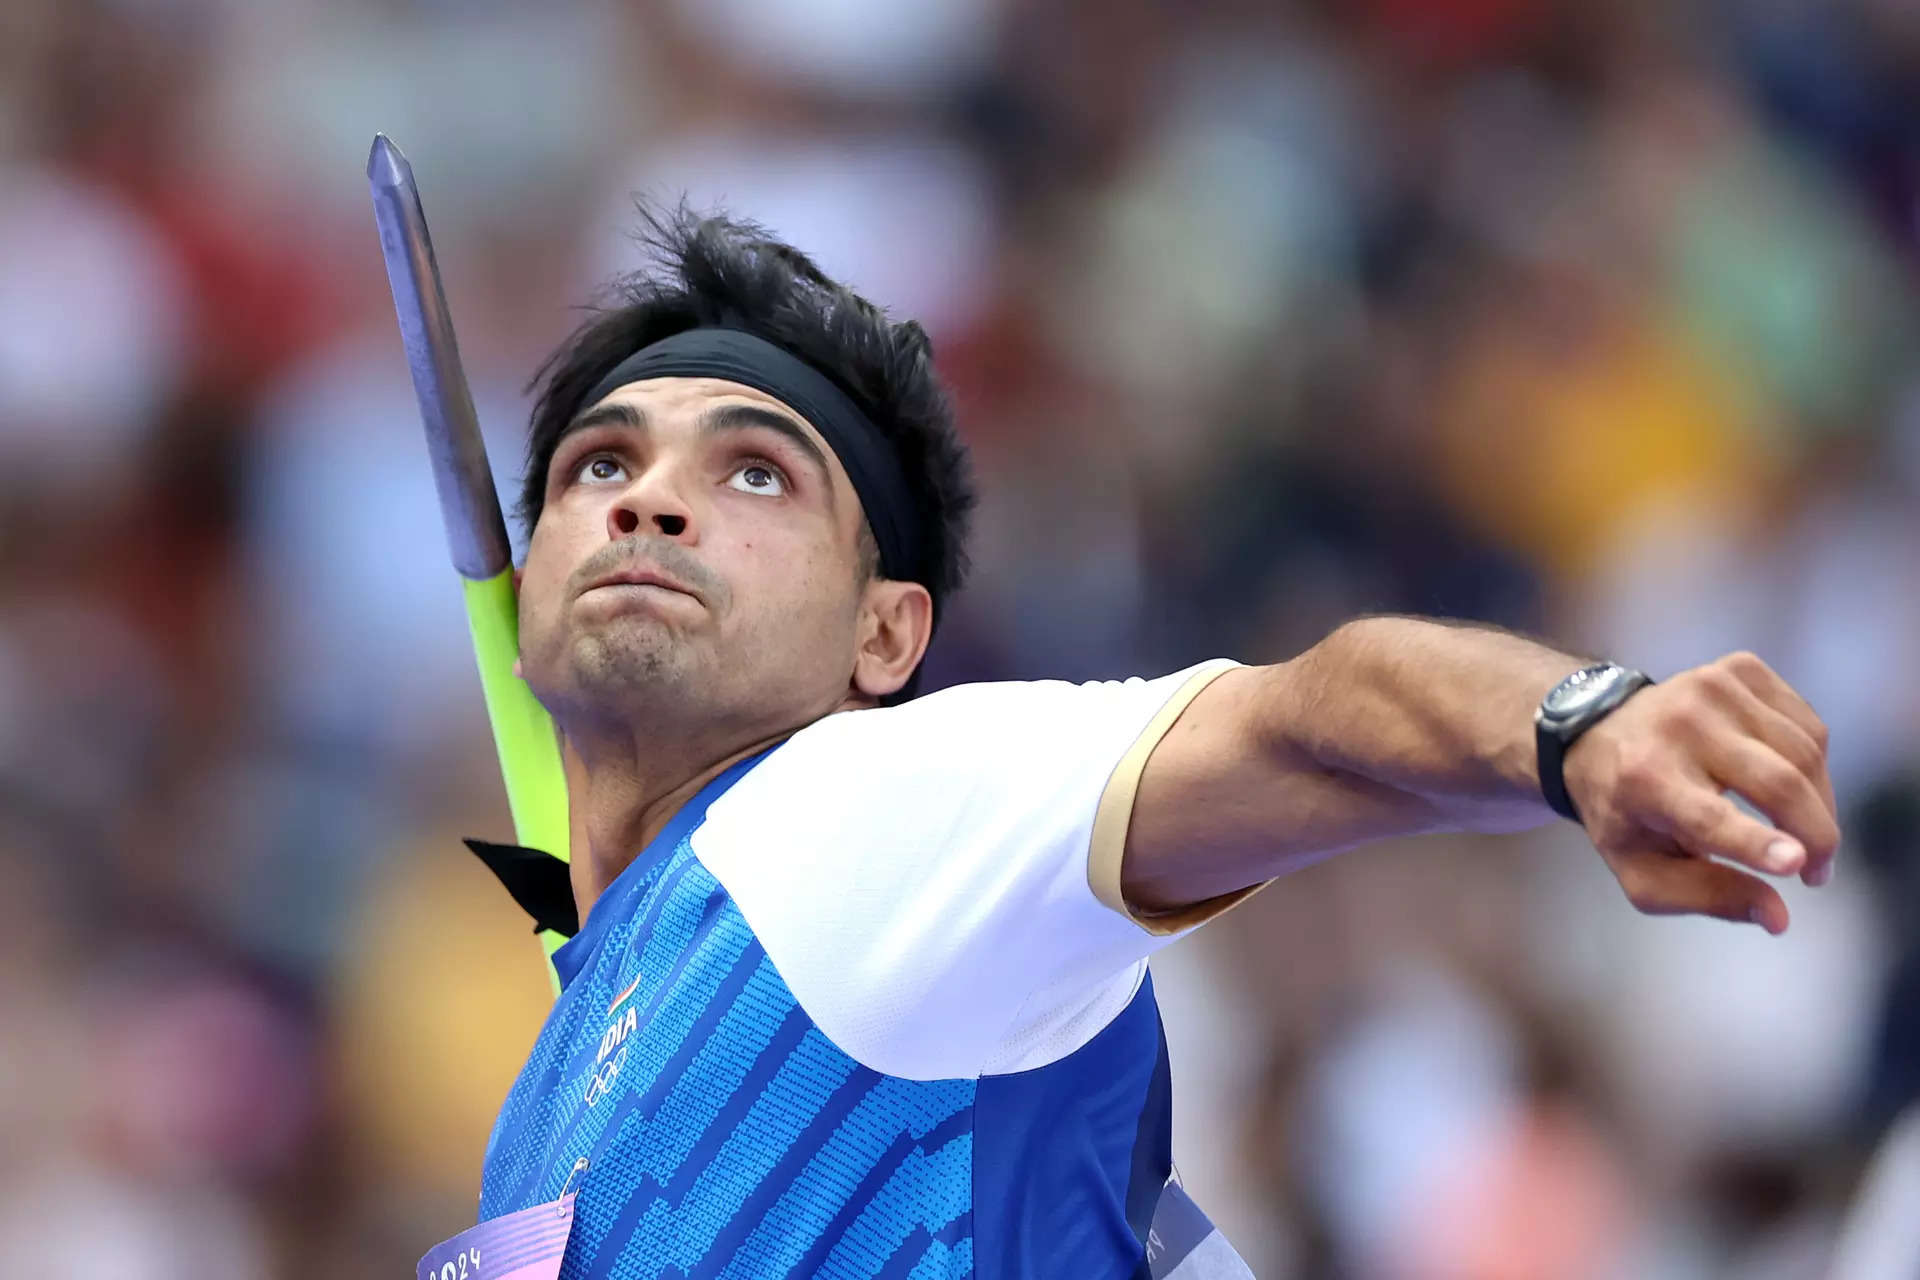 Watch Neeraj Chopra's 89-meter javelin throw to qualify for the Olympic finals 